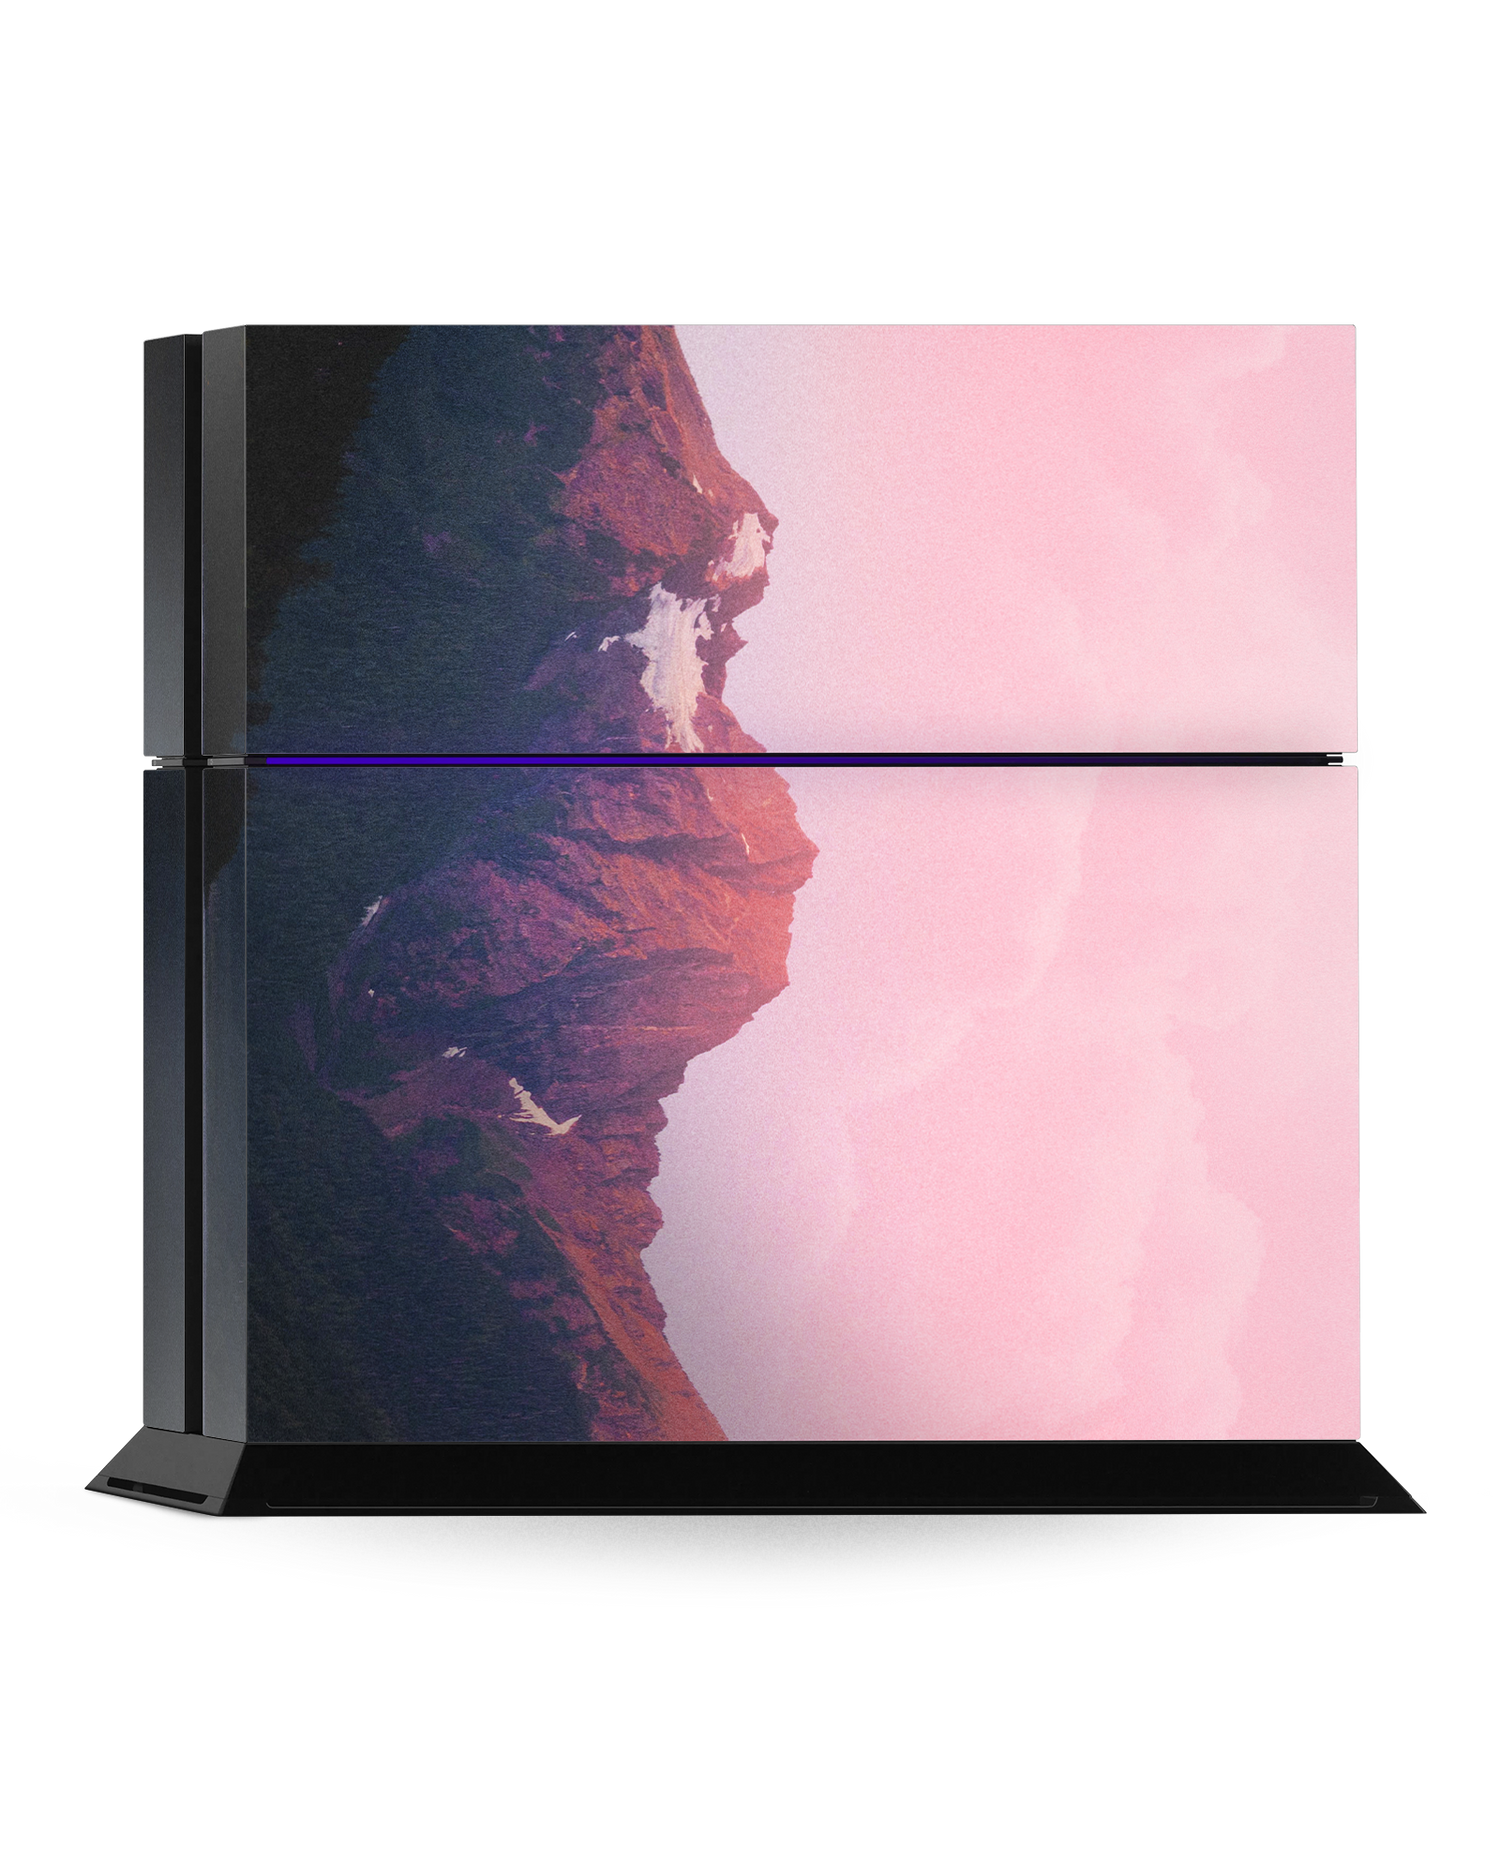 Lake Console Skin for Sony PlayStation 4: Standing